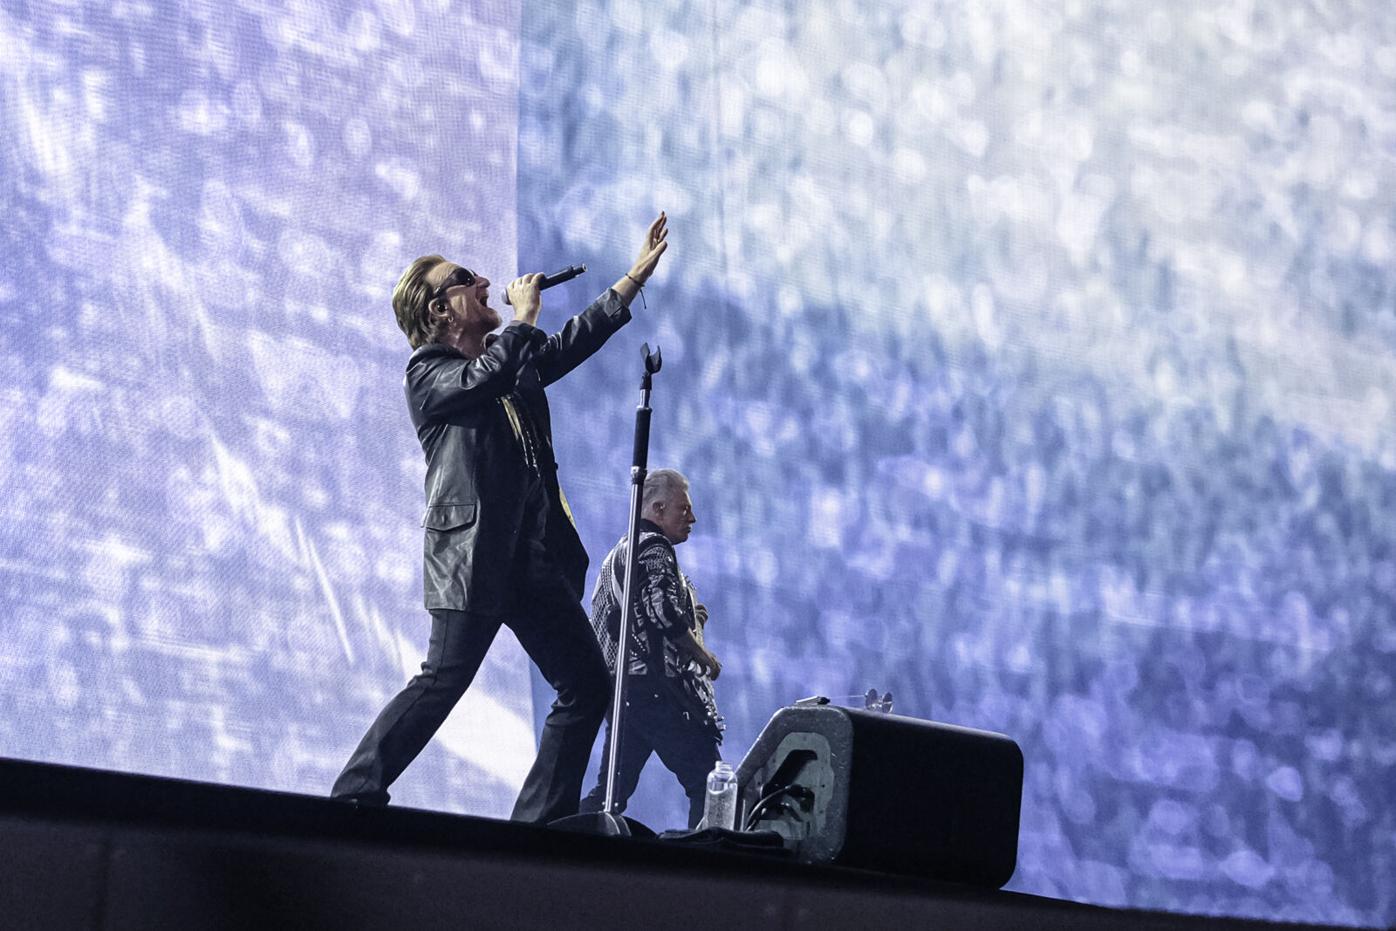 Las Vegas Sphere opens with spectacular U2 show - Access All Areas